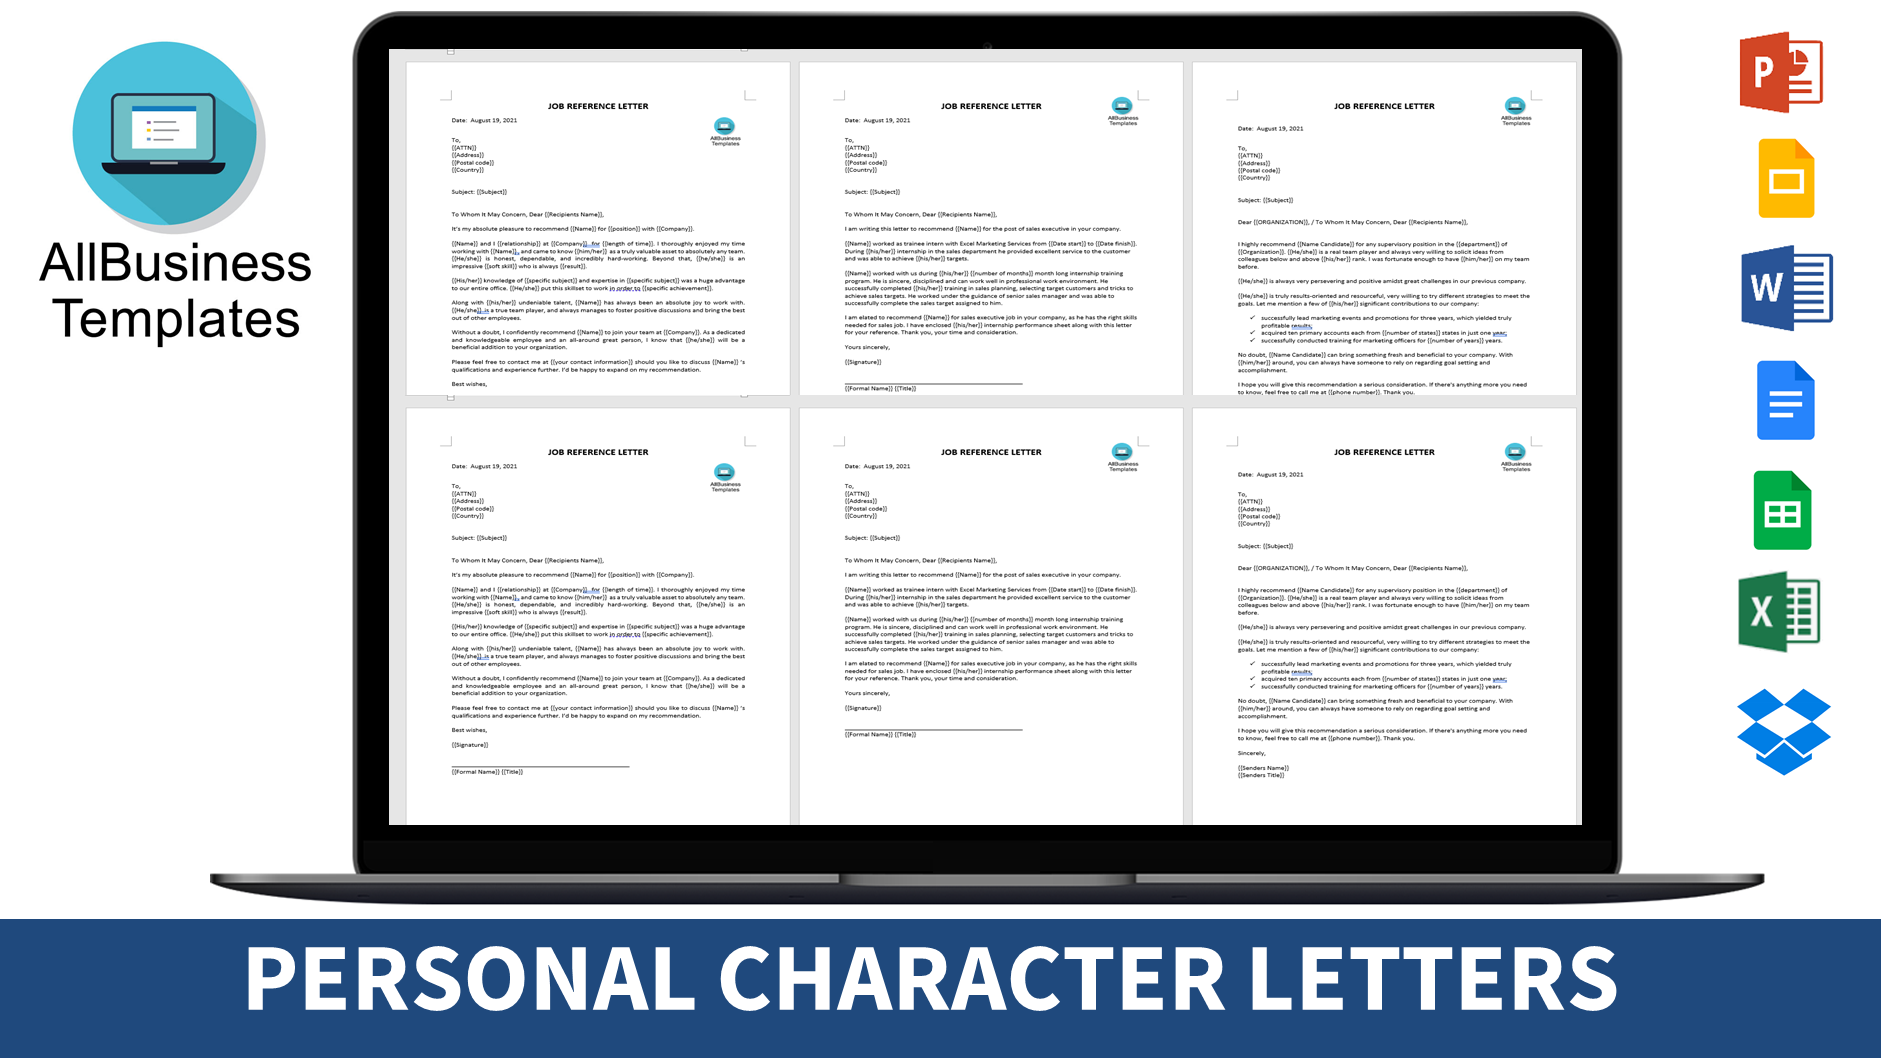 Personal Character Reference Letter main image